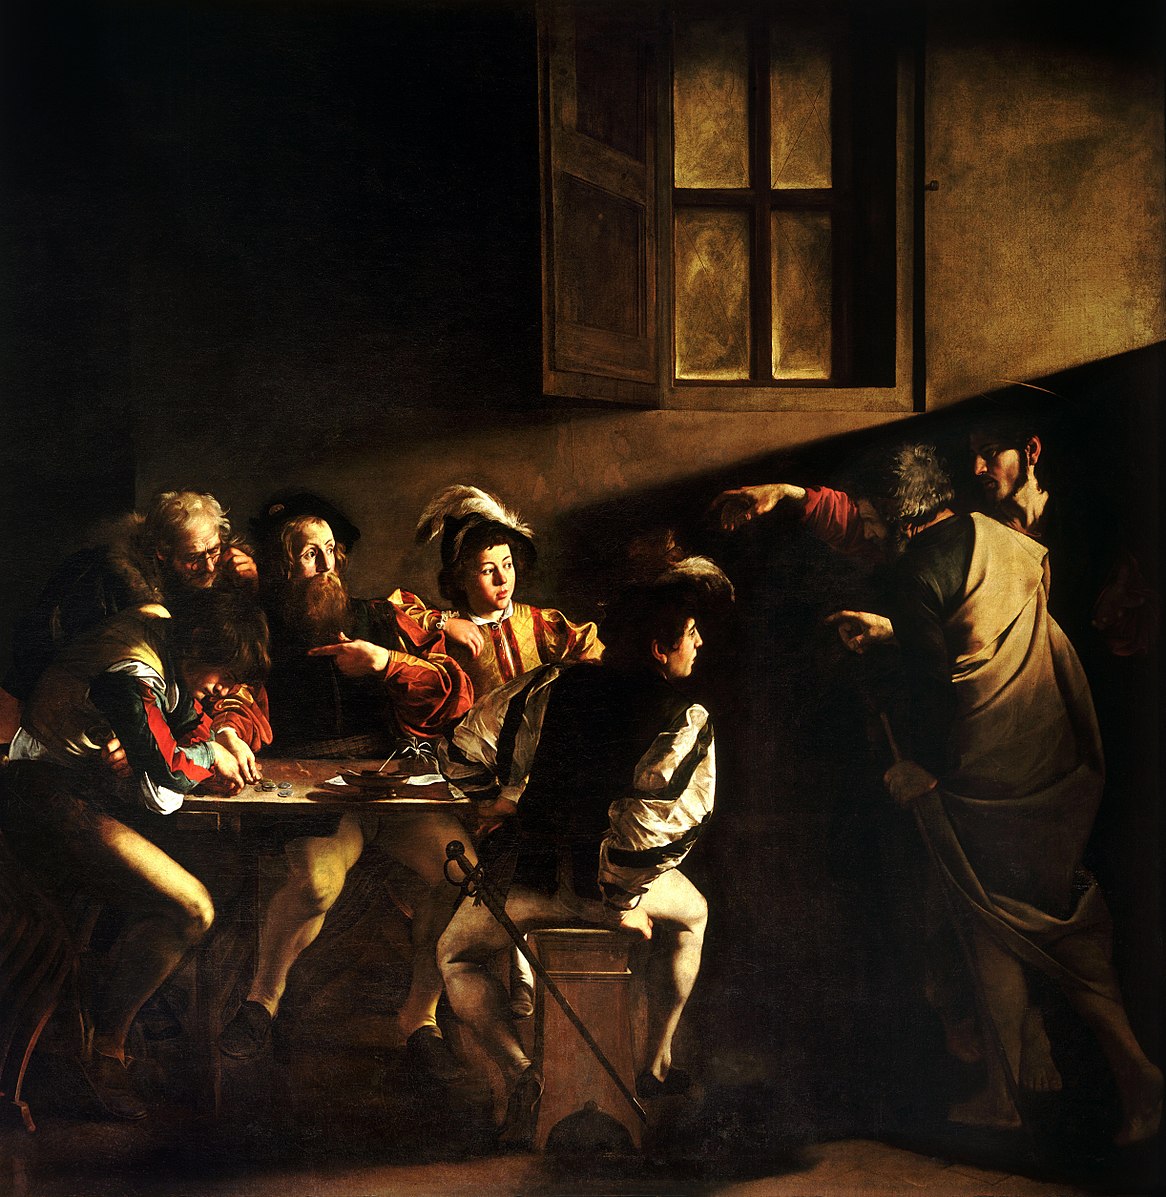 A religious setting of several men at a table